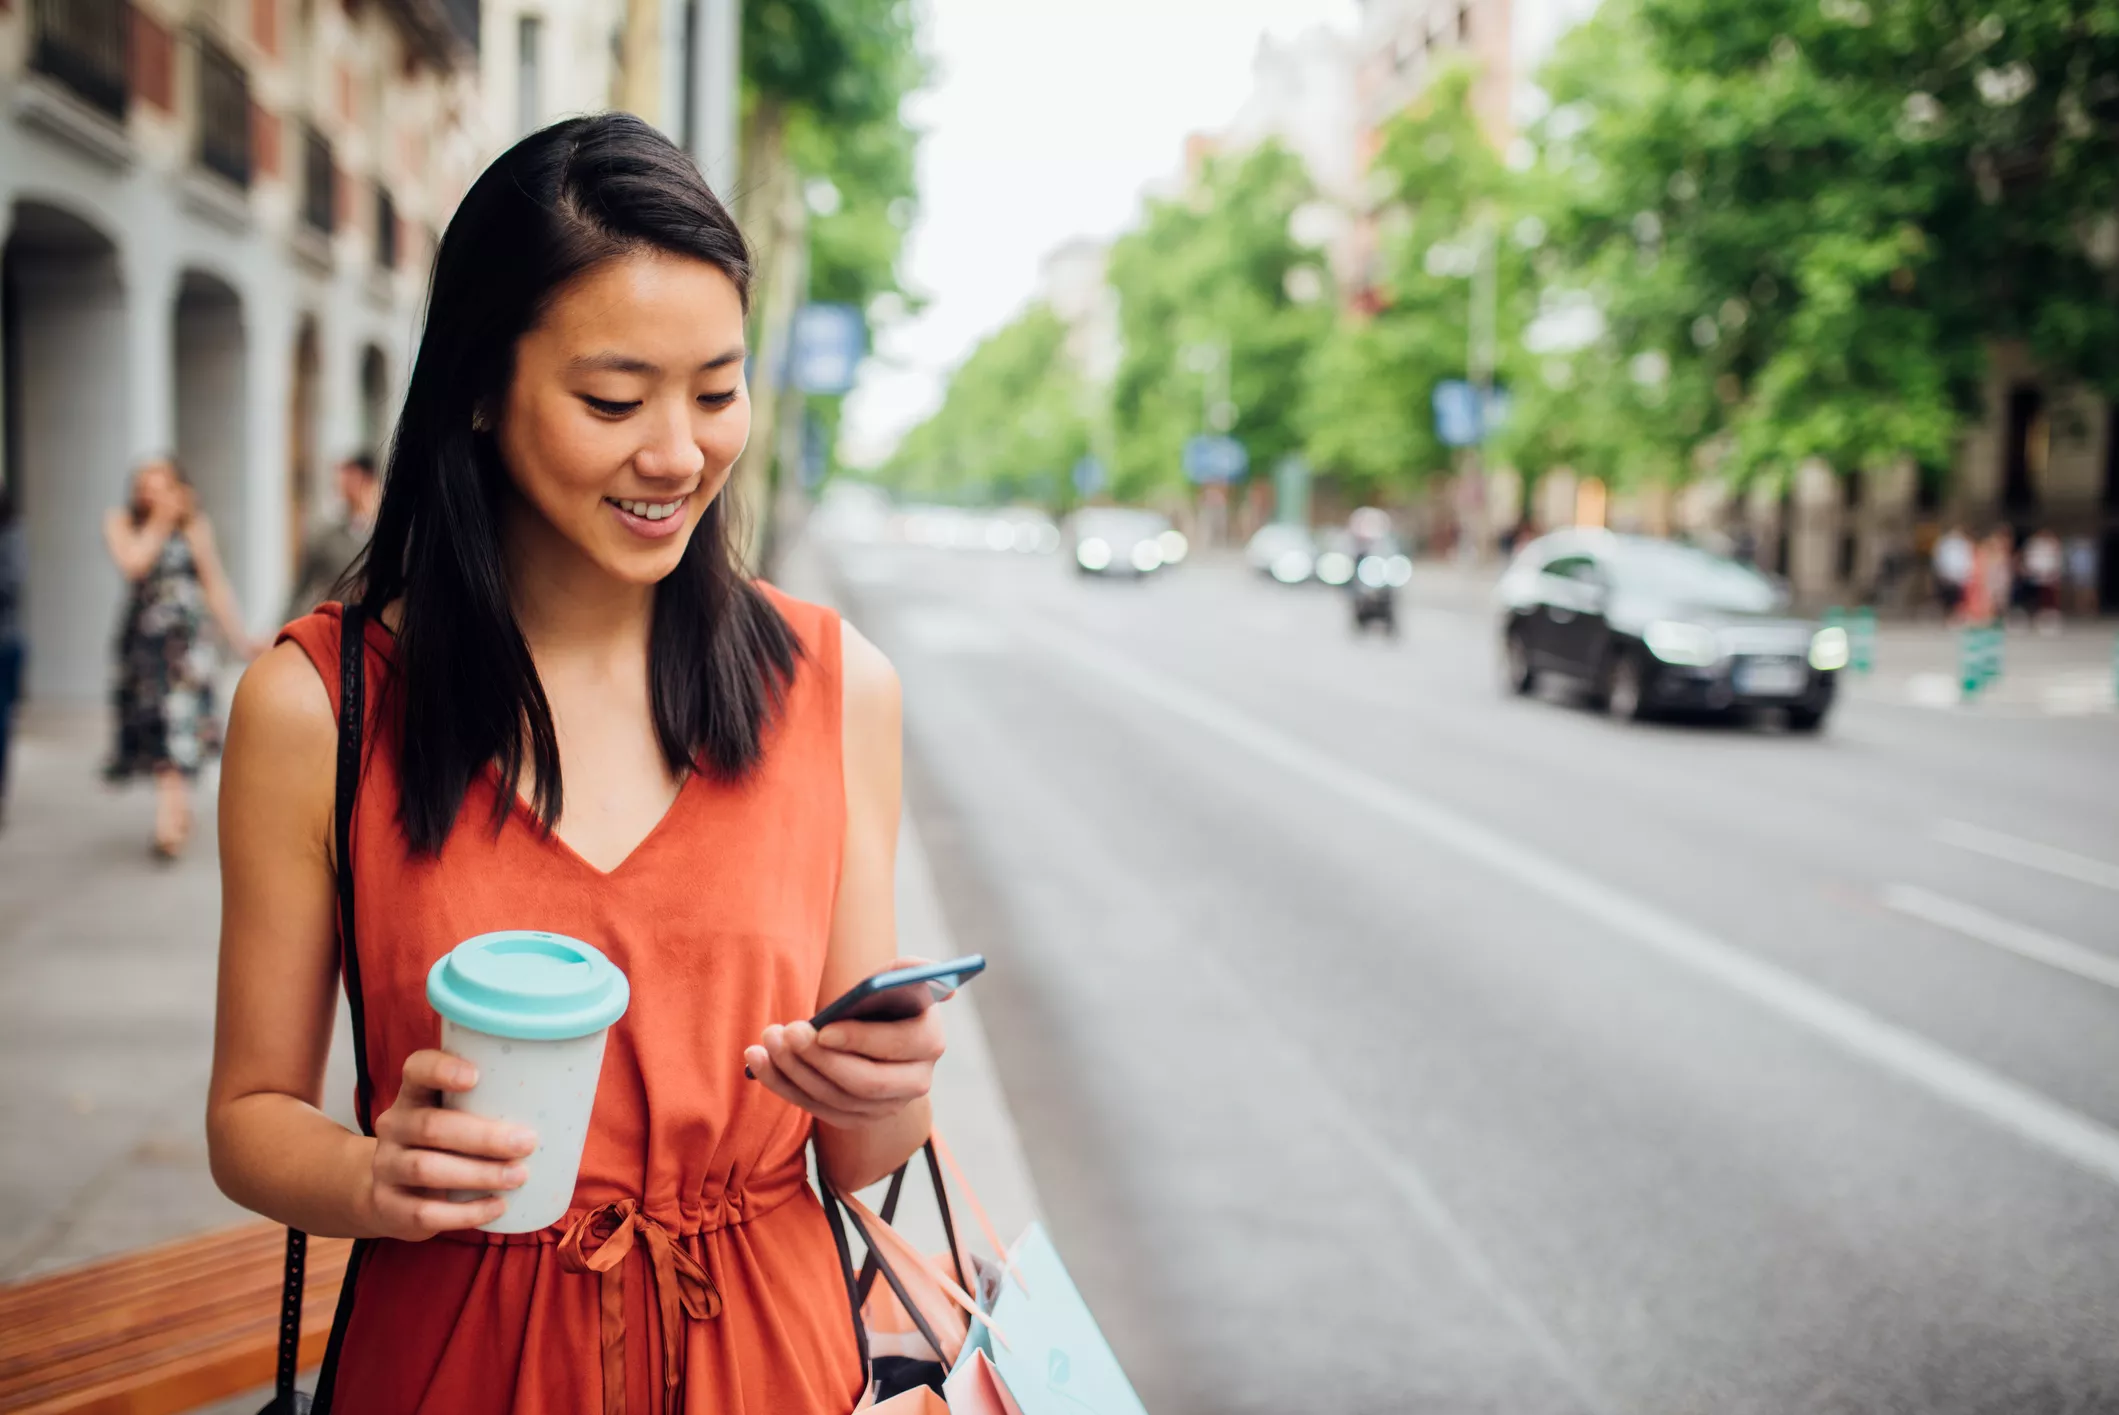 woman smiling while walking down street and looking at phone